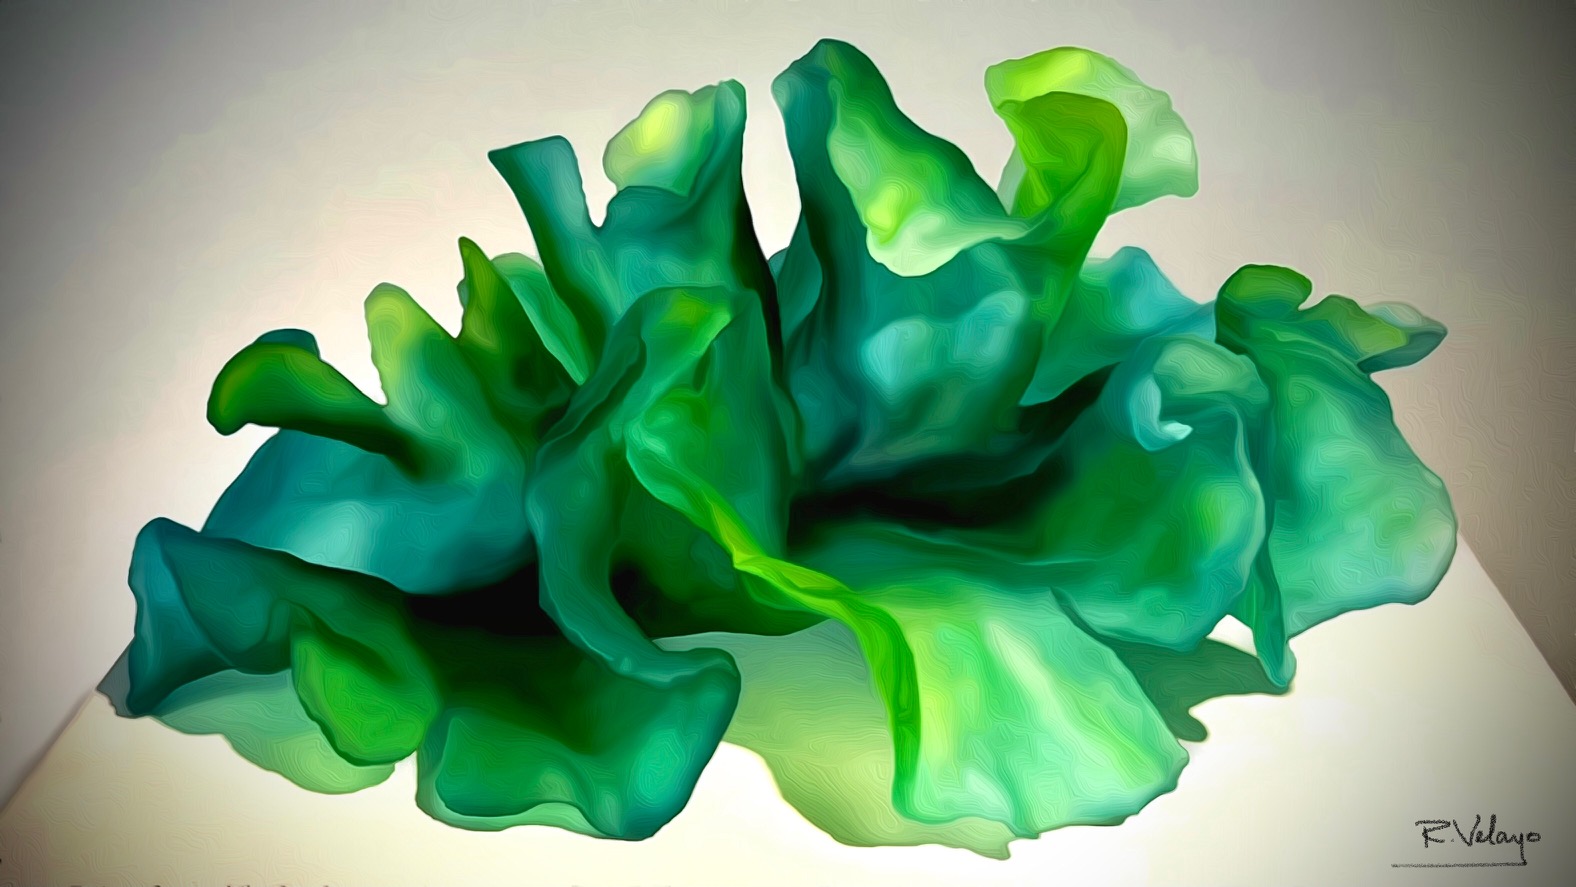 "ABSTRACT FLORA IN GREEN" [Created: 8/28/2022]